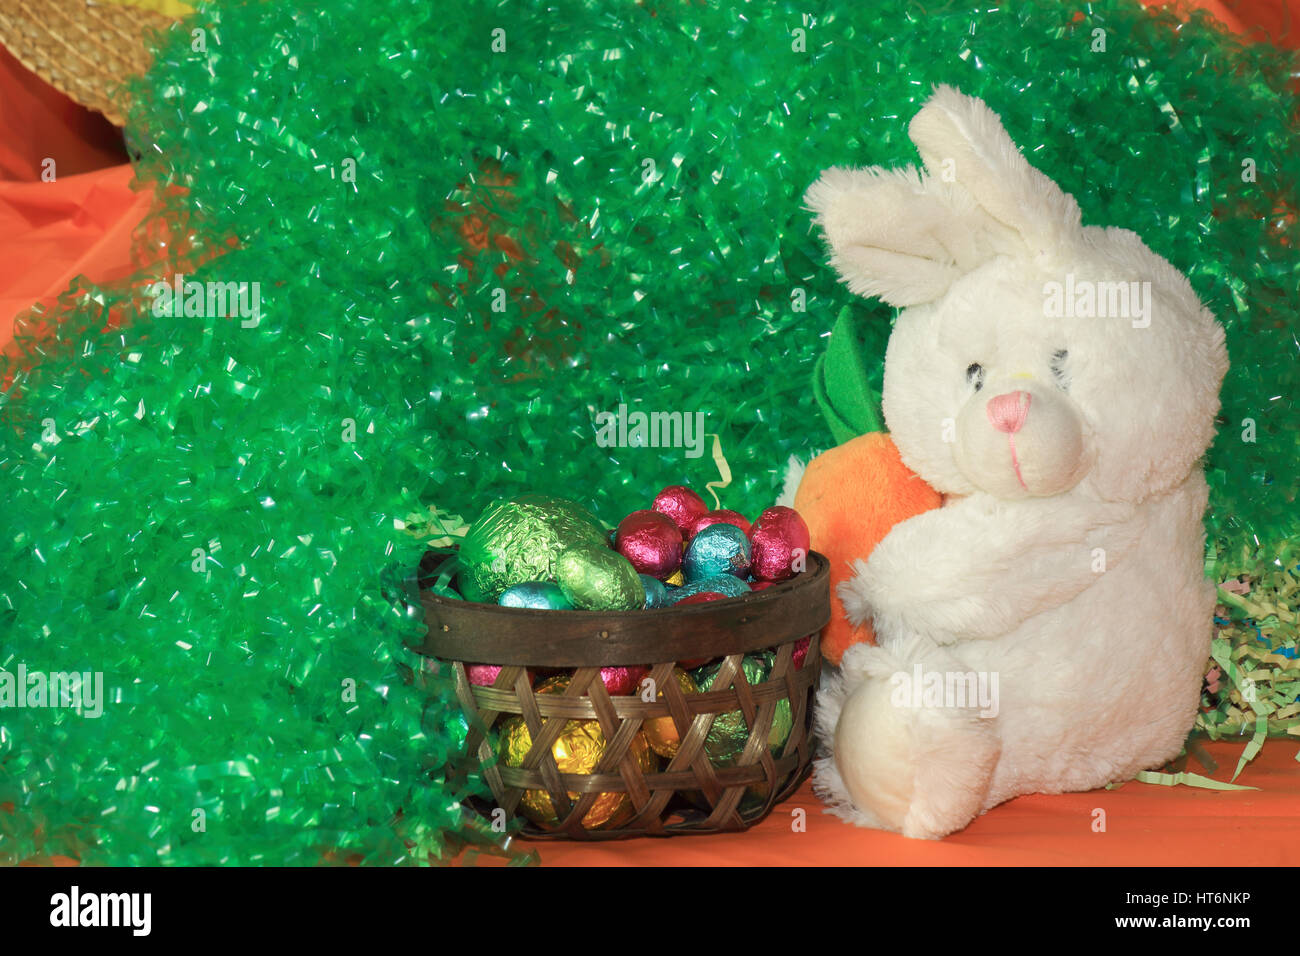 An image showing the concept of Easter with a pot full of eggs and a white bunny Stock Photo